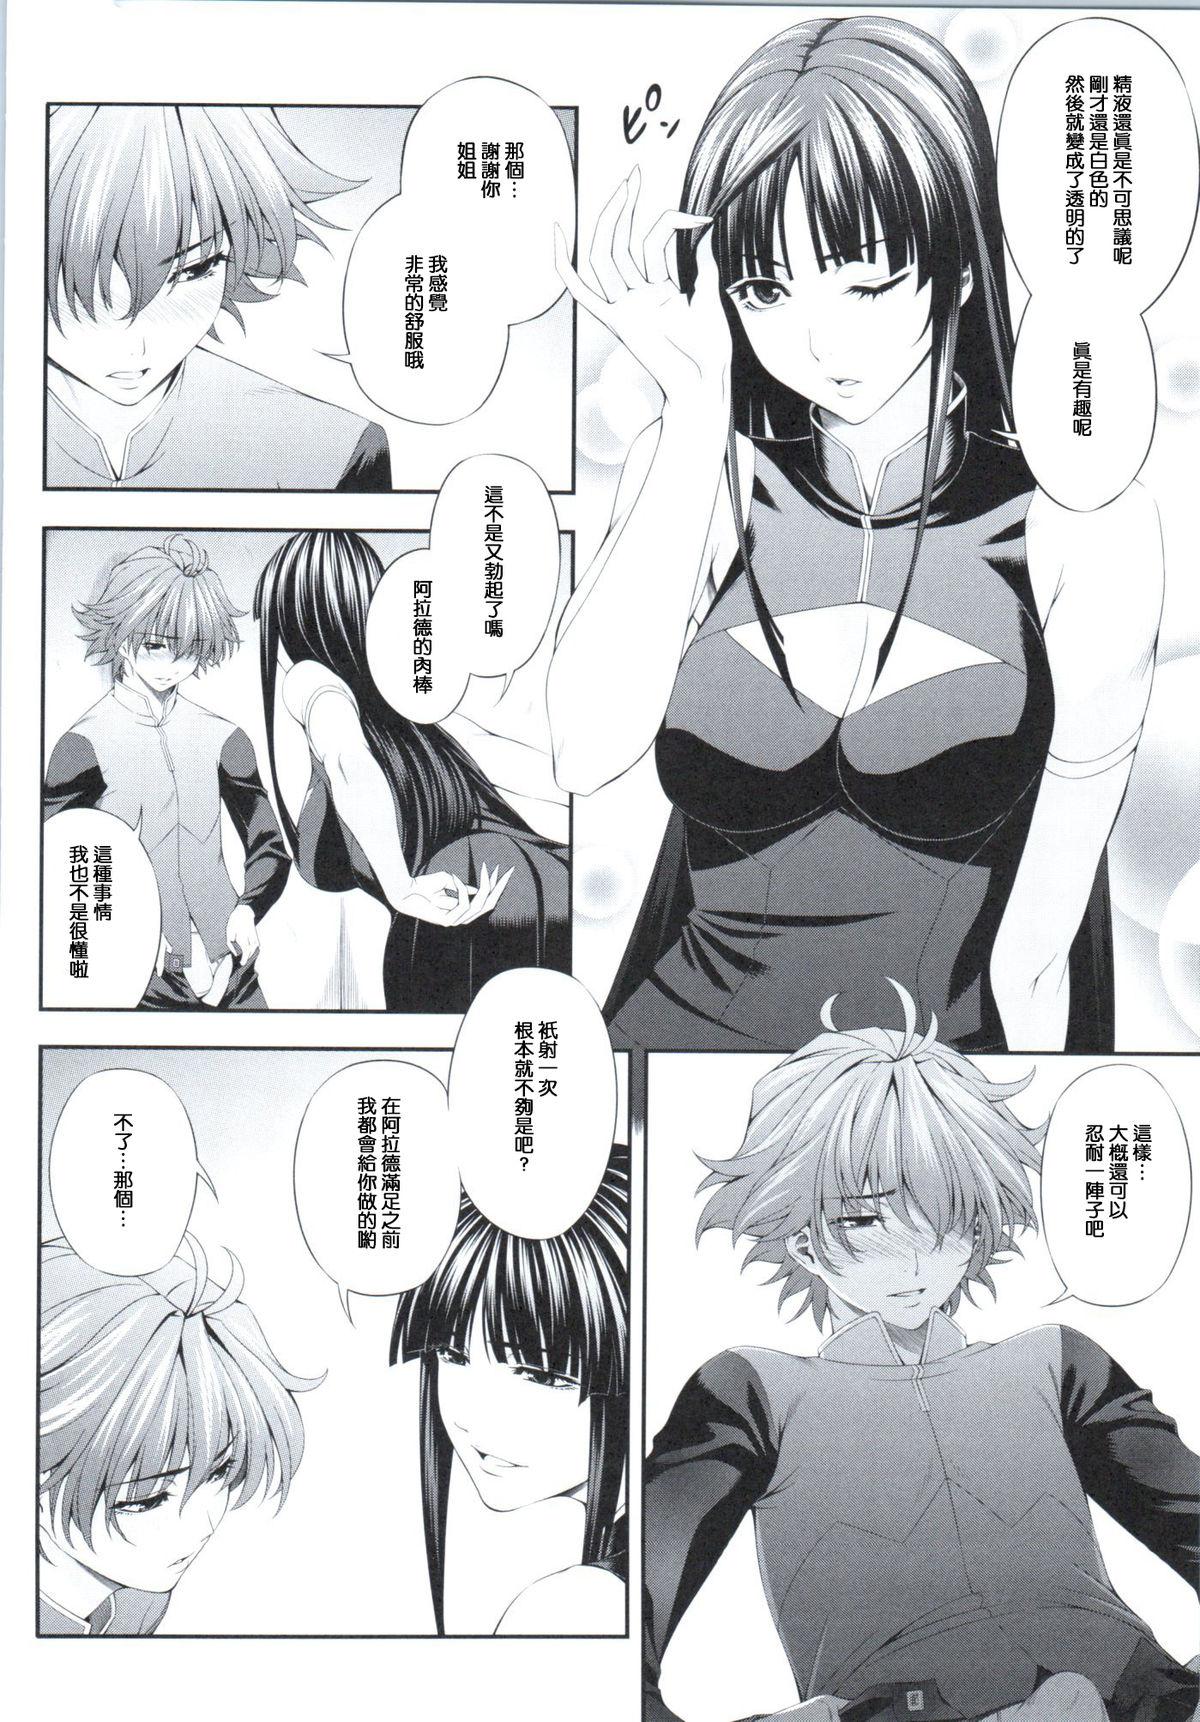 Good Ouka of book - Super robot wars Escort - Page 3